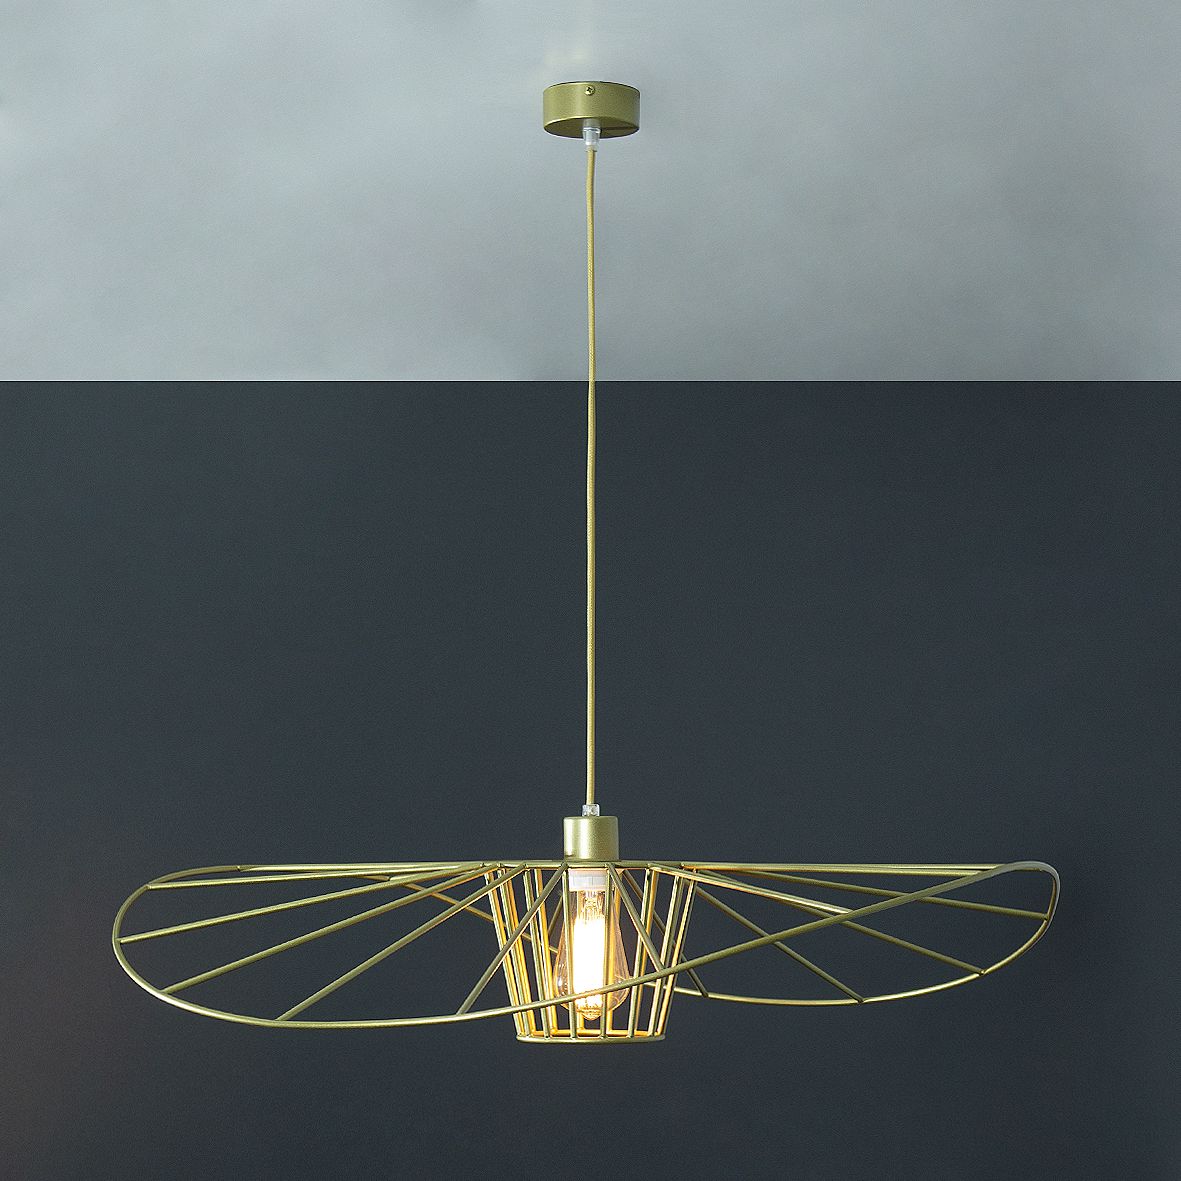 Suspension lamp Lady gold